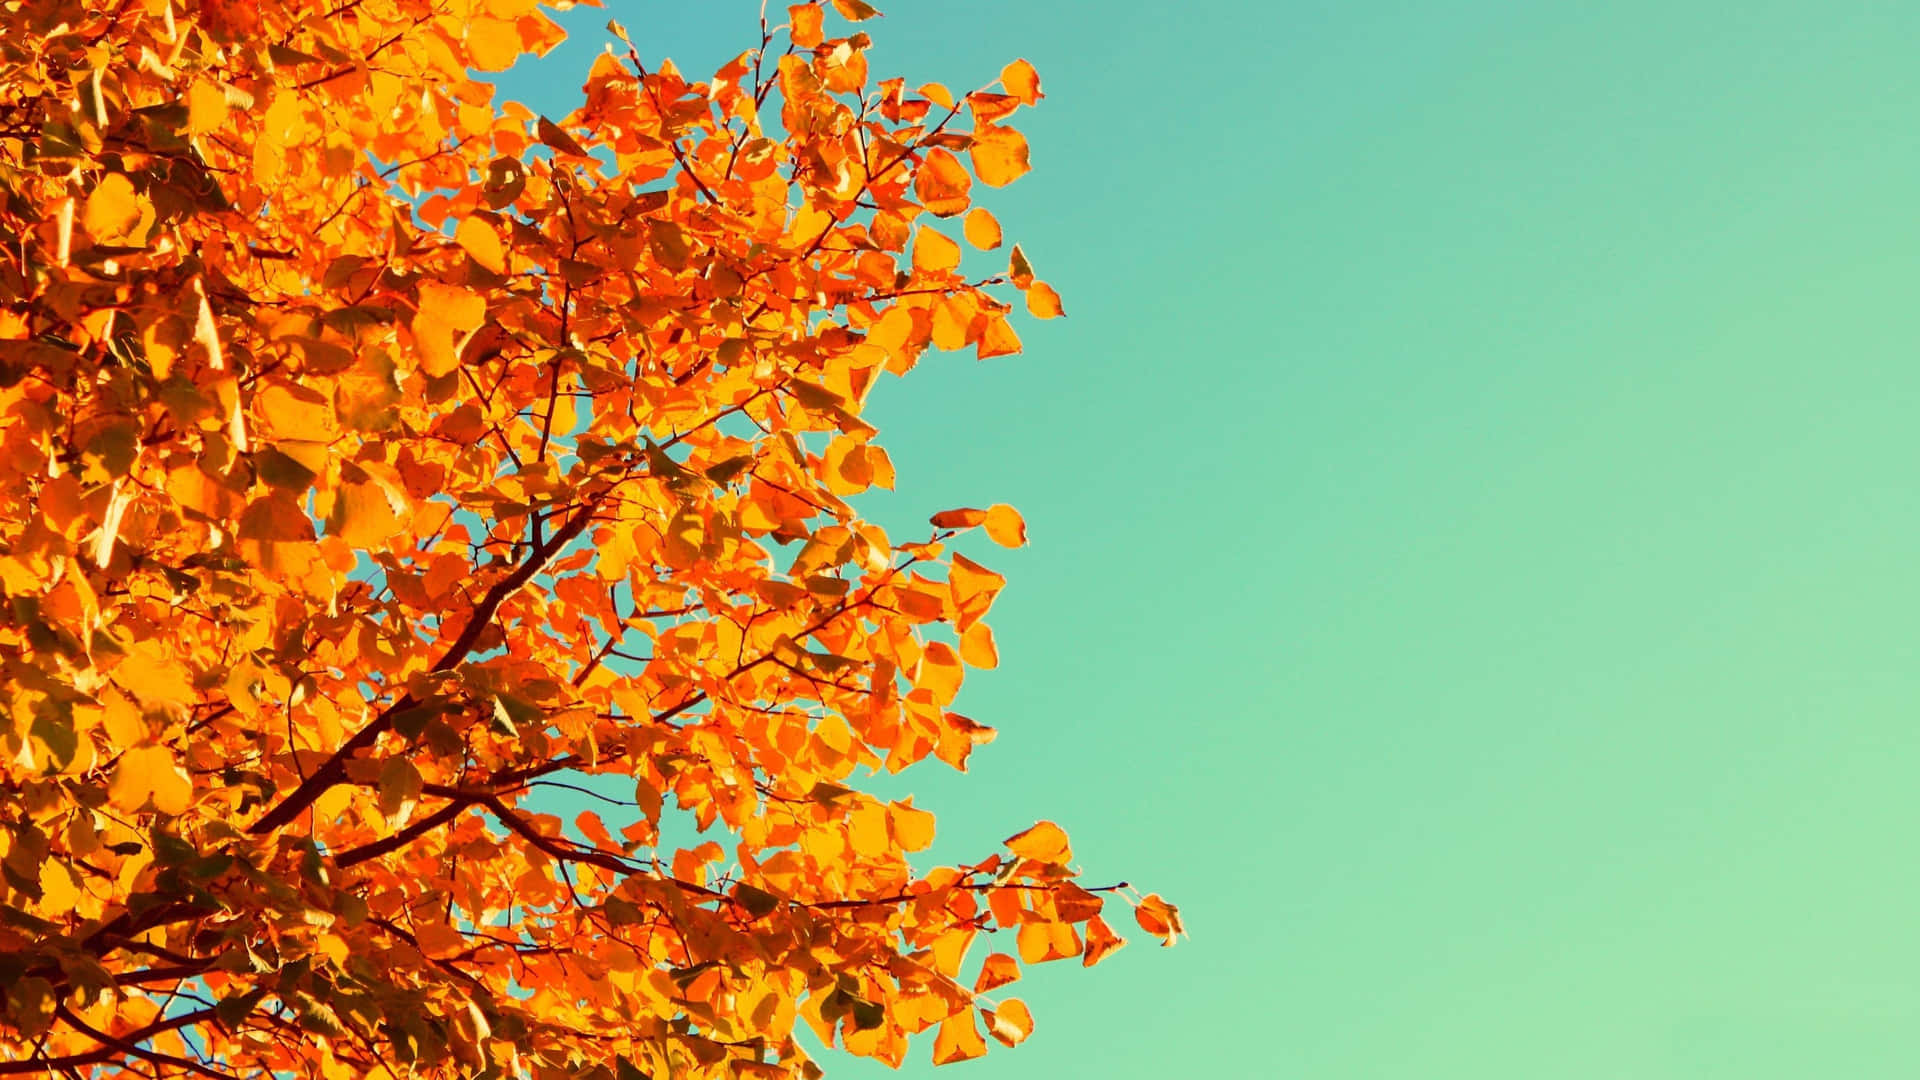 Enjoy the colors of Autumn with this adorable desktop background Wallpaper